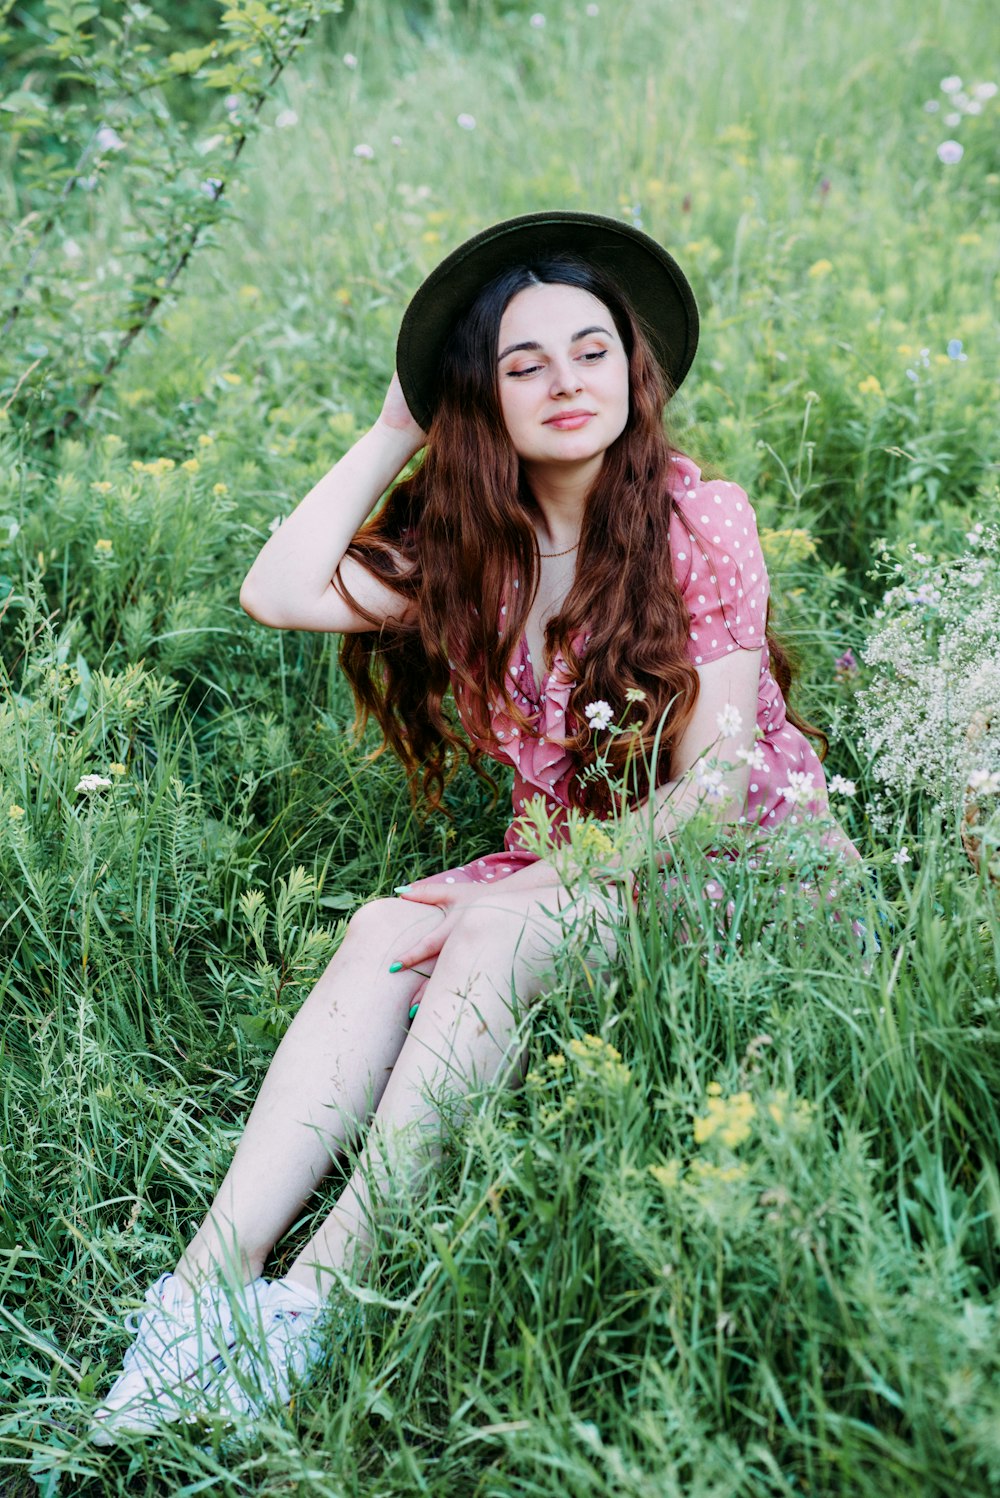 woman in white and pink floral dress sitting on green grass during daytime